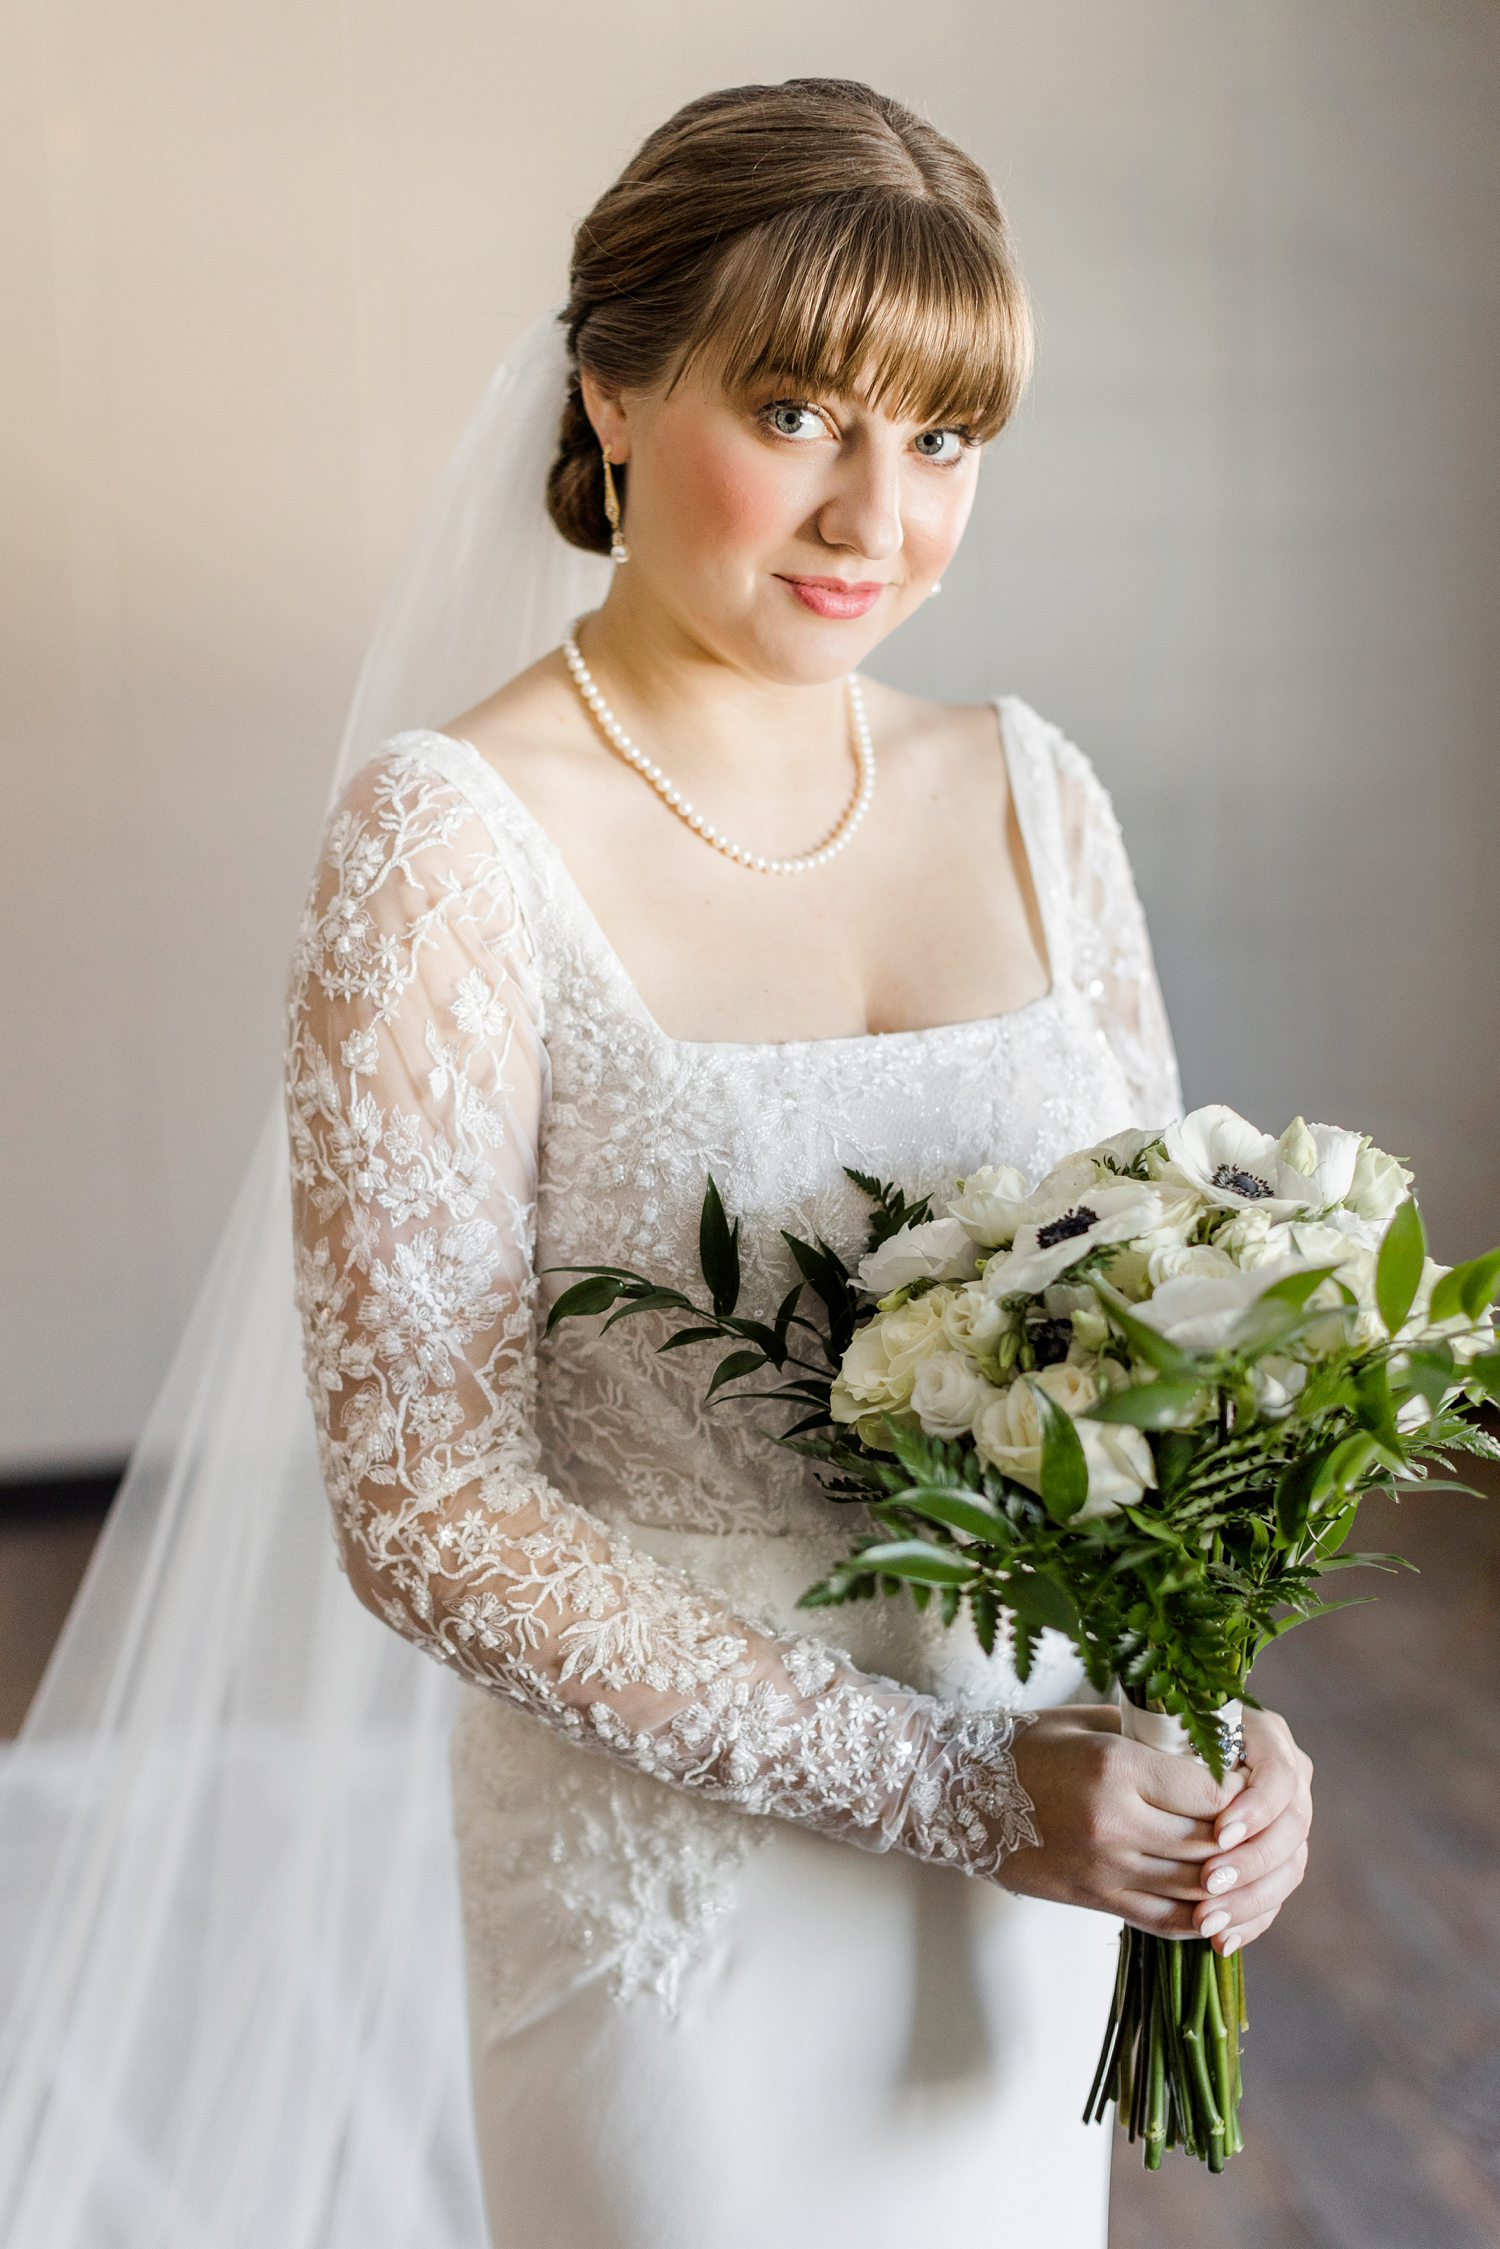 Bride, Madeline, dressed in a custom Stella York long sleeve wedding gown with custom cathedral length veil standing in a wooden church holding a white rose and anemone bouquet | CB Studio